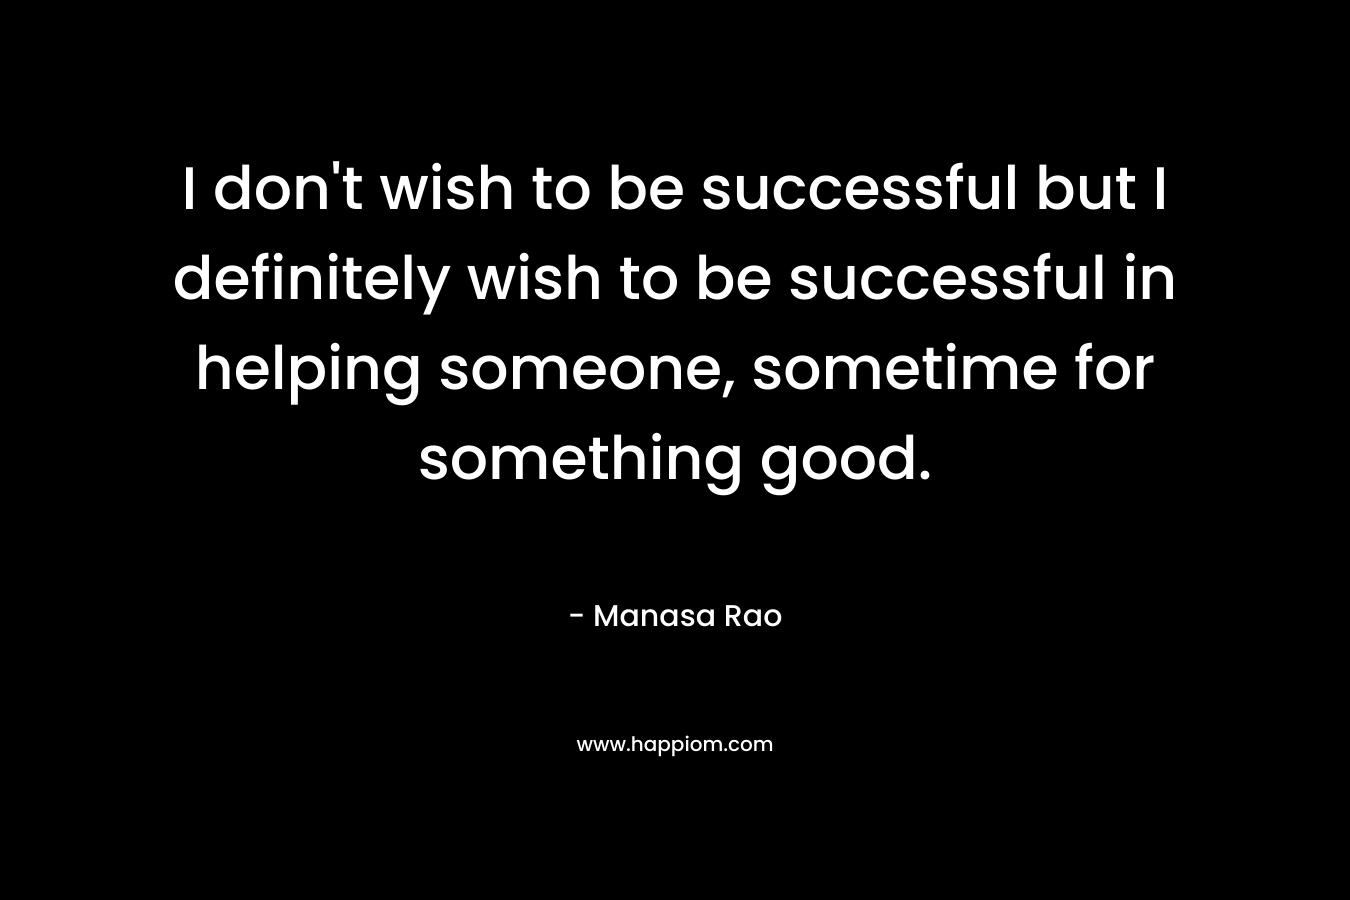 I don't wish to be successful but I definitely wish to be successful in helping someone, sometime for something good.